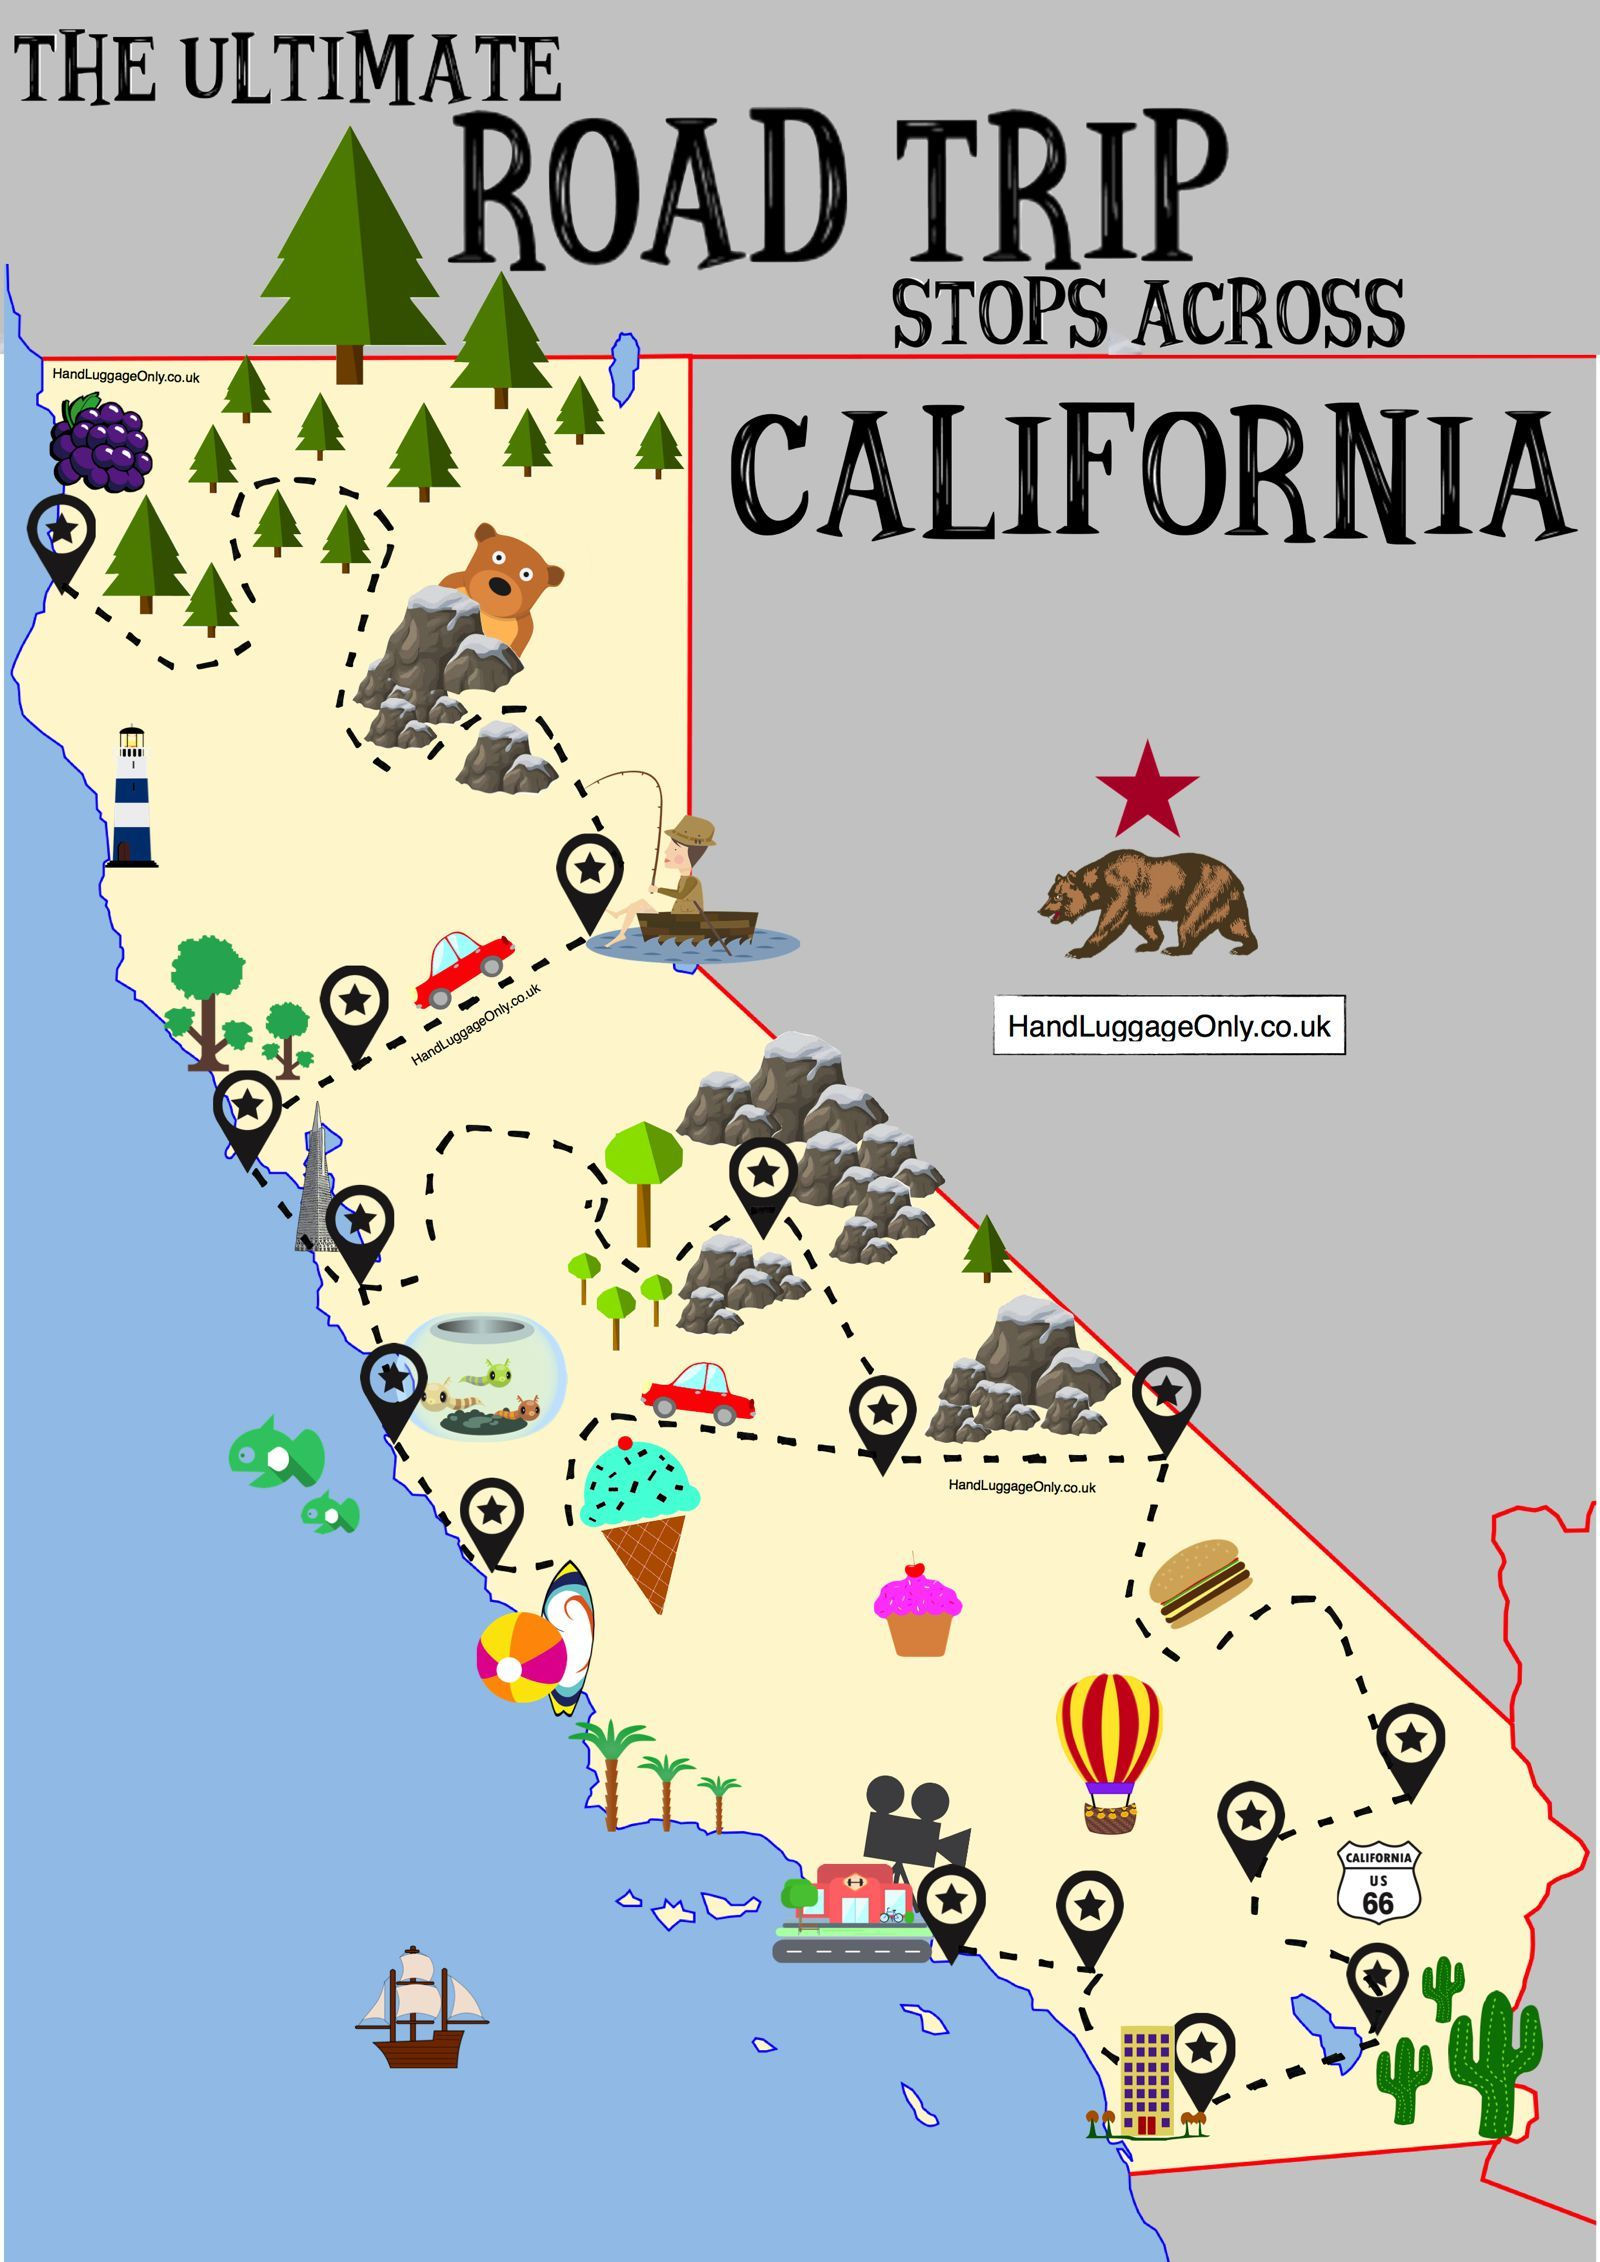 The Ultimate Road Trip Map Of Places To Visit In California | Travel - California Road Trip Trip Planner Map